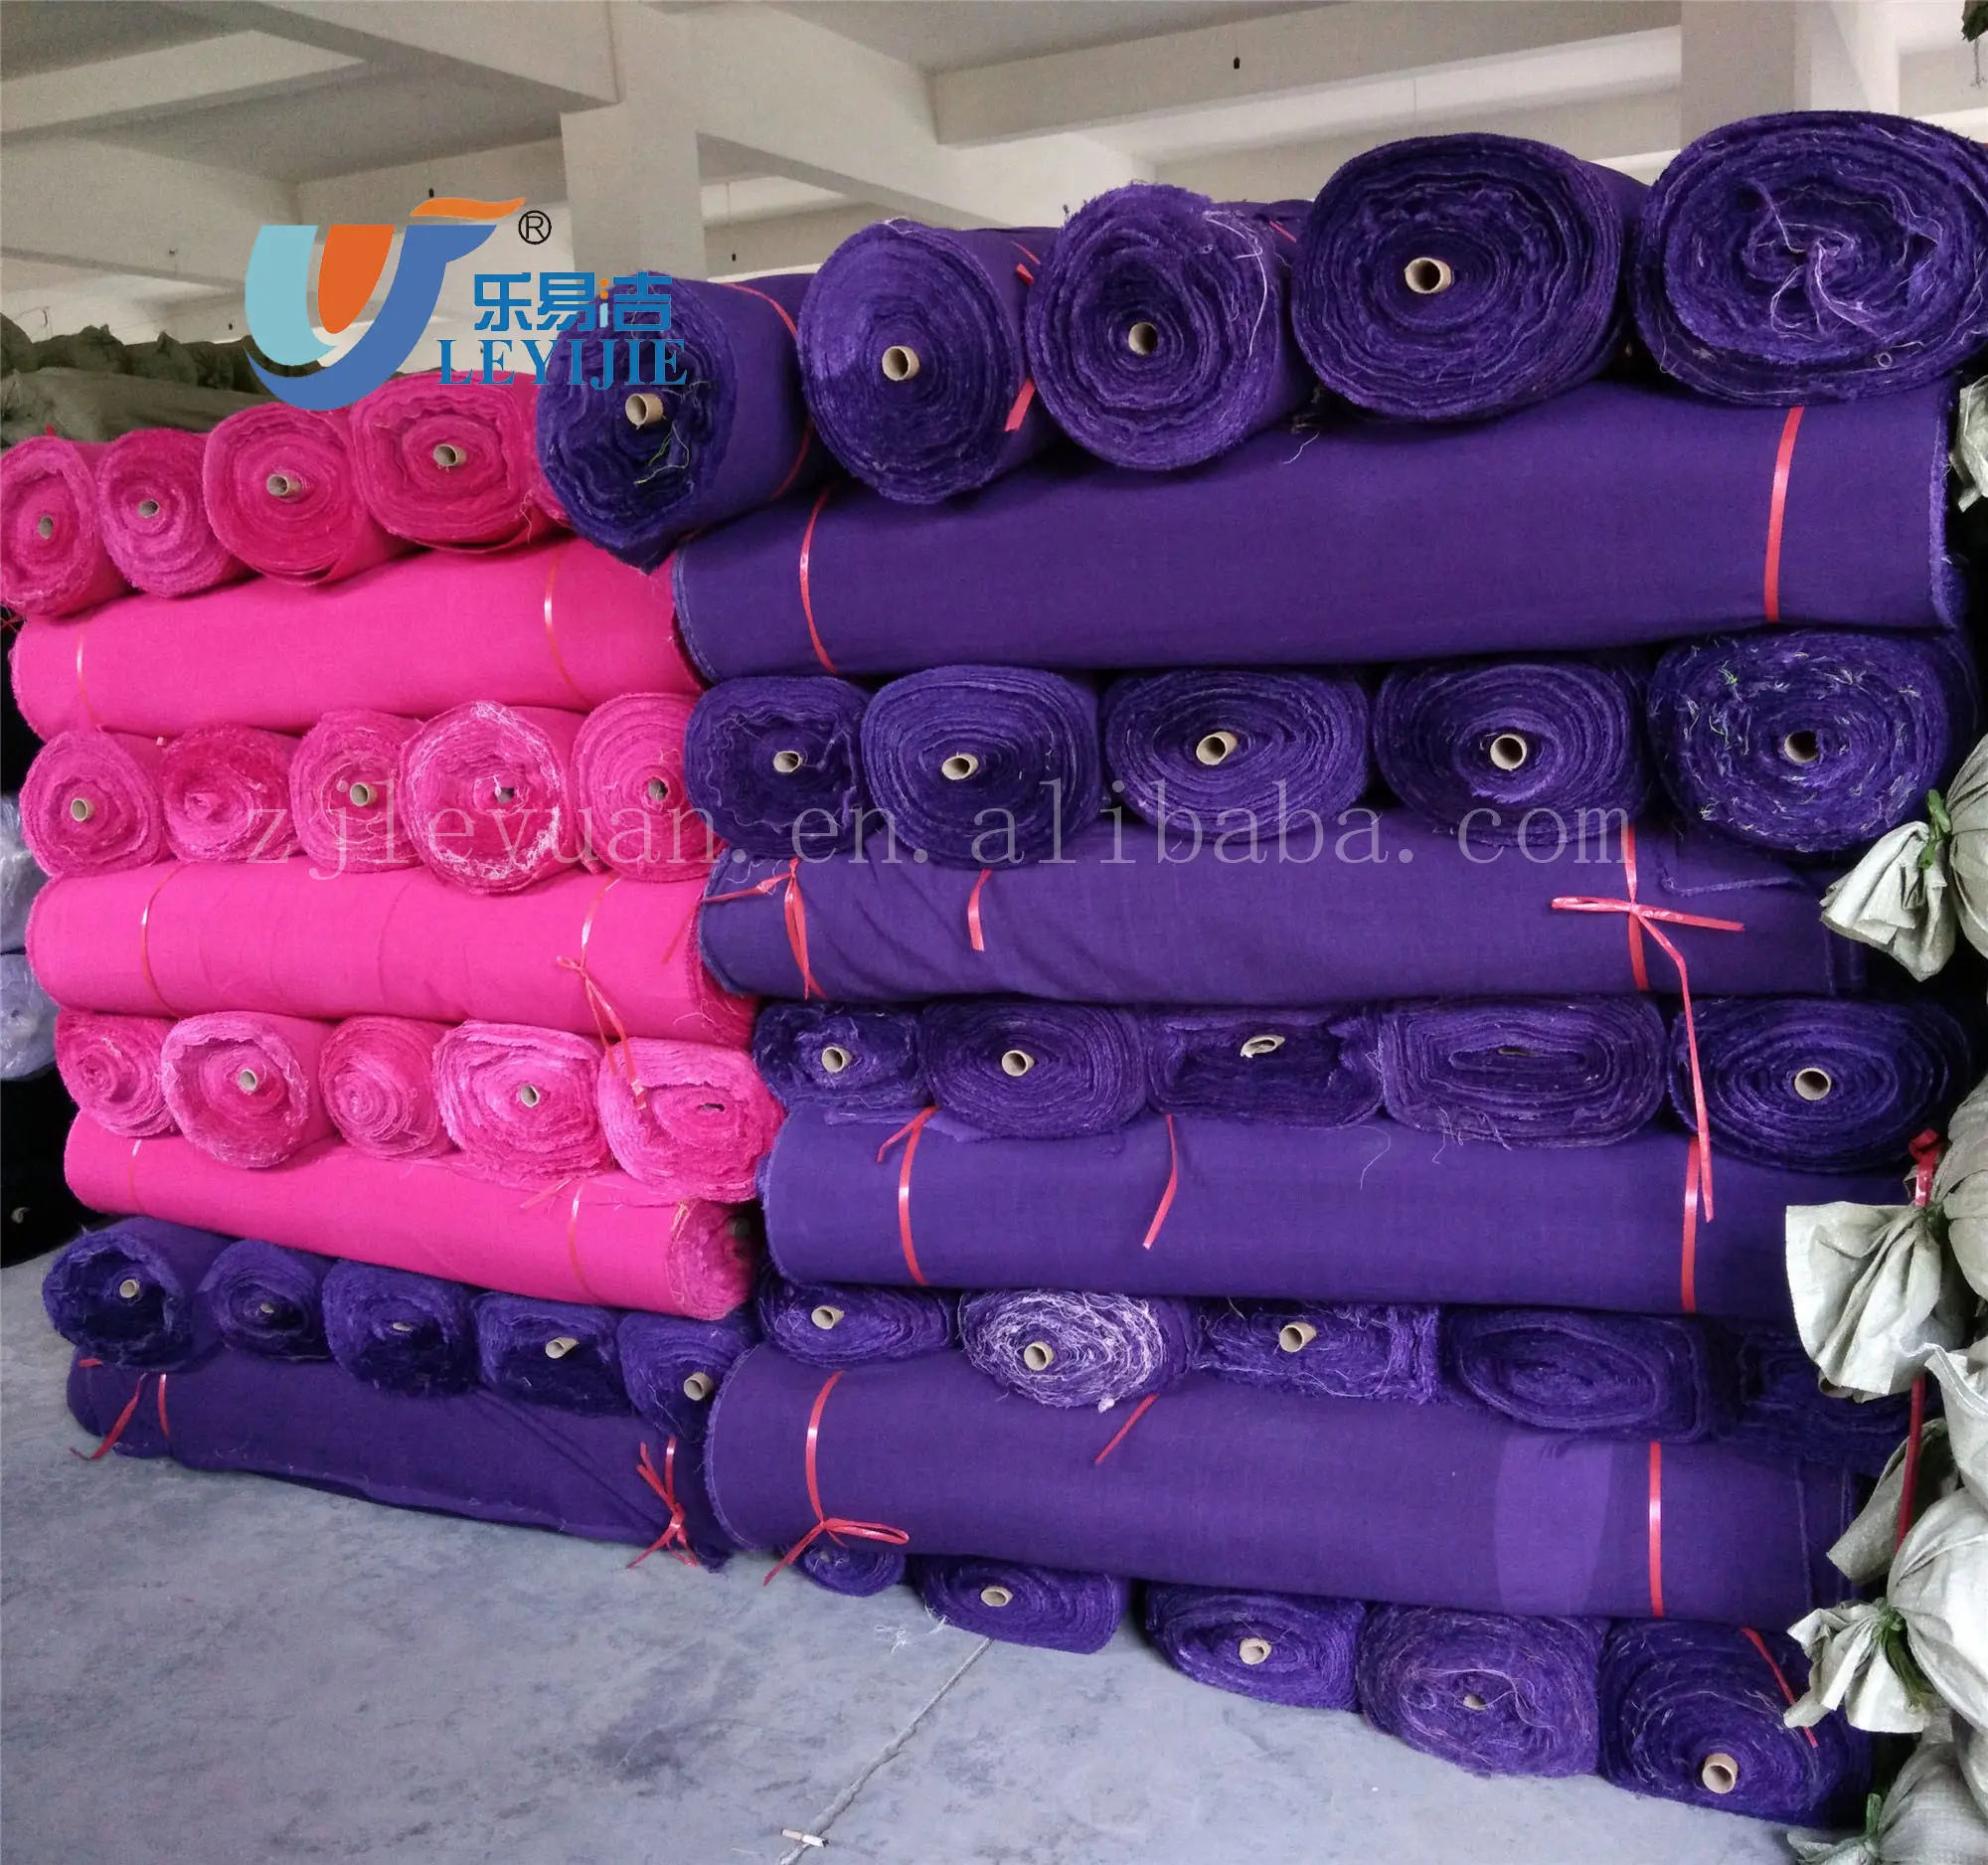 Chinese Factory Supply Rayon Viscose Fabric 56/58"Width Morocco Bath Fabric 300D Double Fabric Rolls